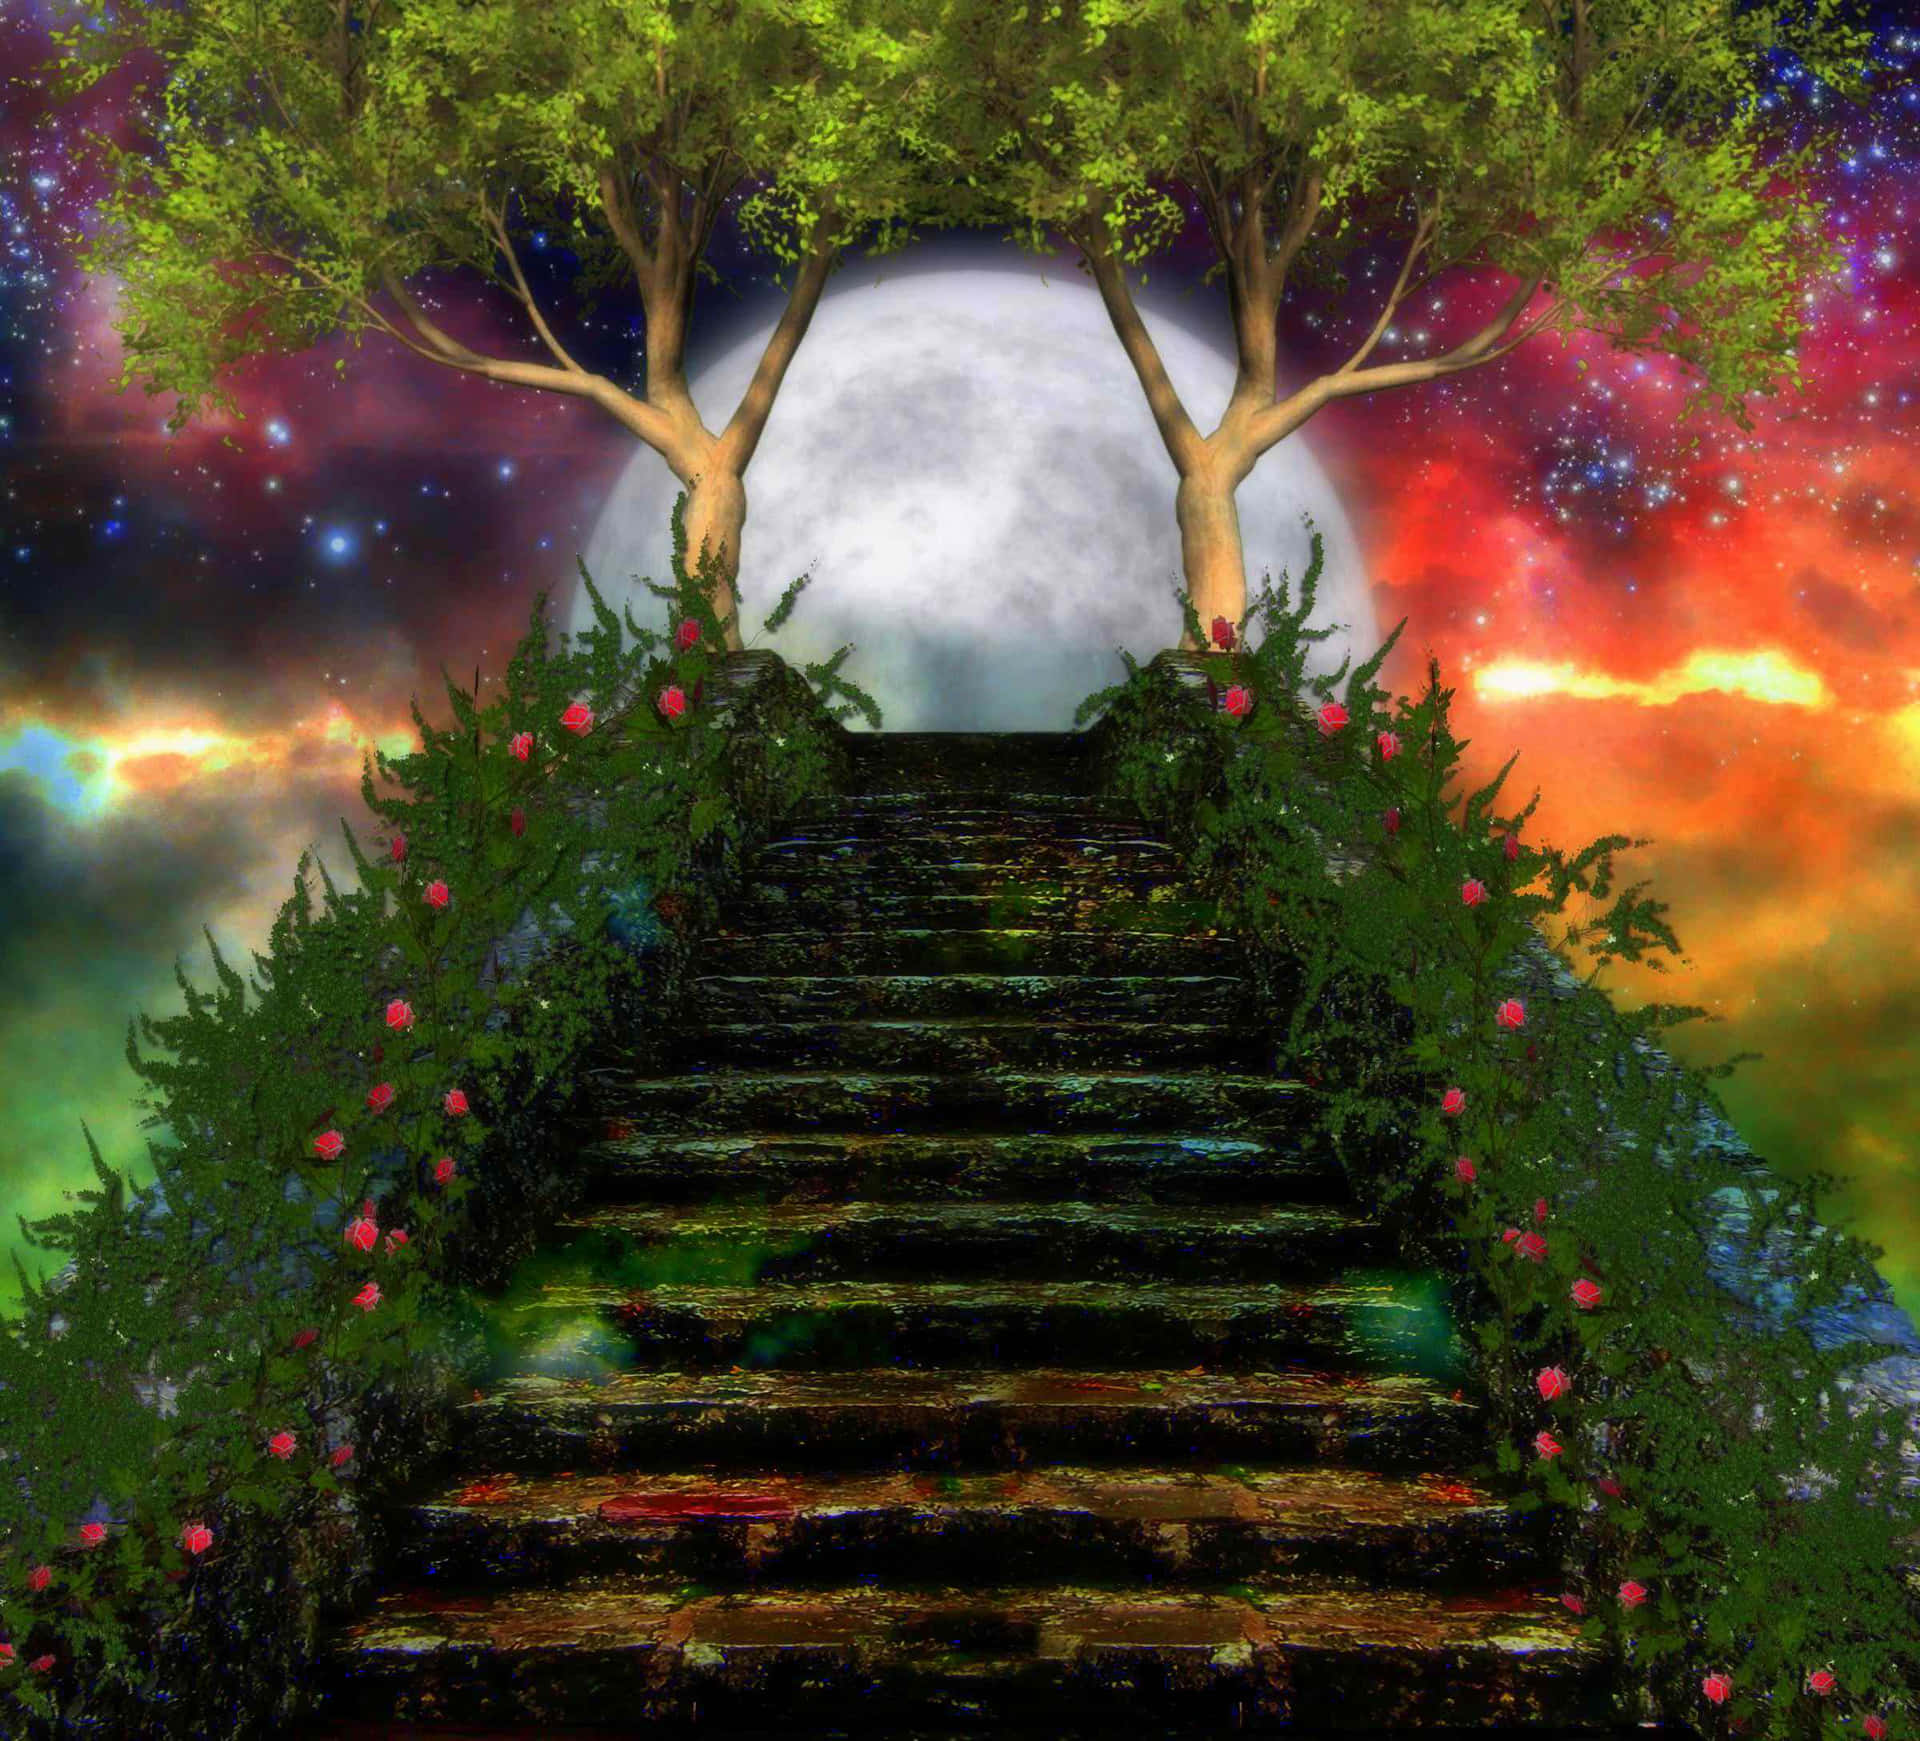 "Climb the Stairway to Heaven" Wallpaper